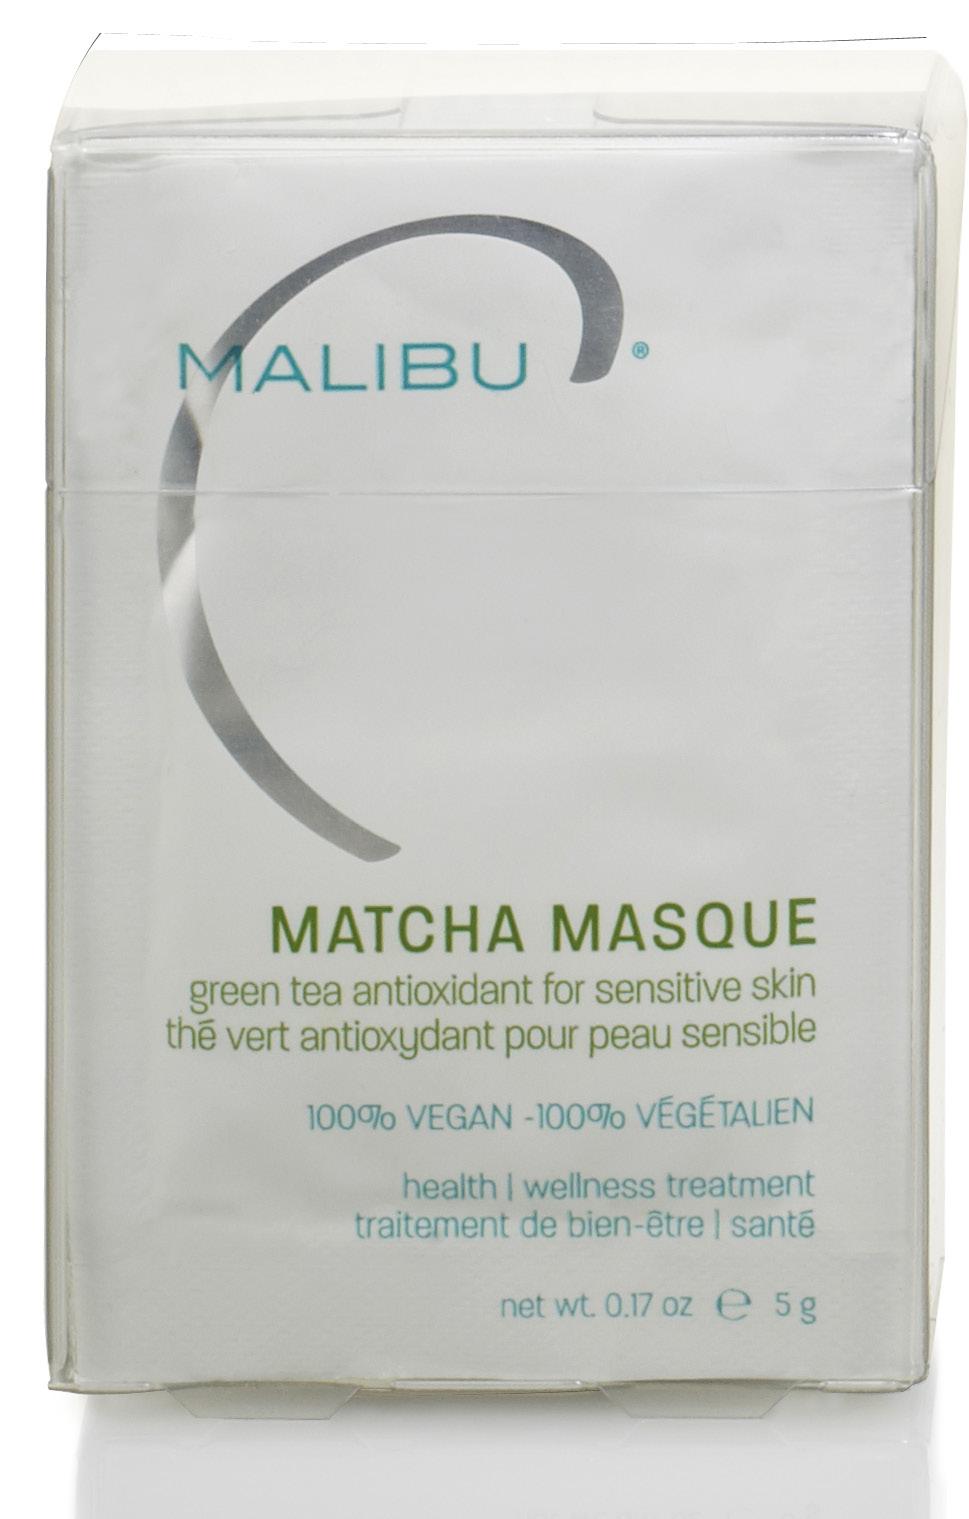 MATCHA MASQUE an antioxidant wellness masque for sensitive and problematic skin An antioxidant masque for sensitive and problematic skin Helps improve the appearance of skin affected by abnormal skin